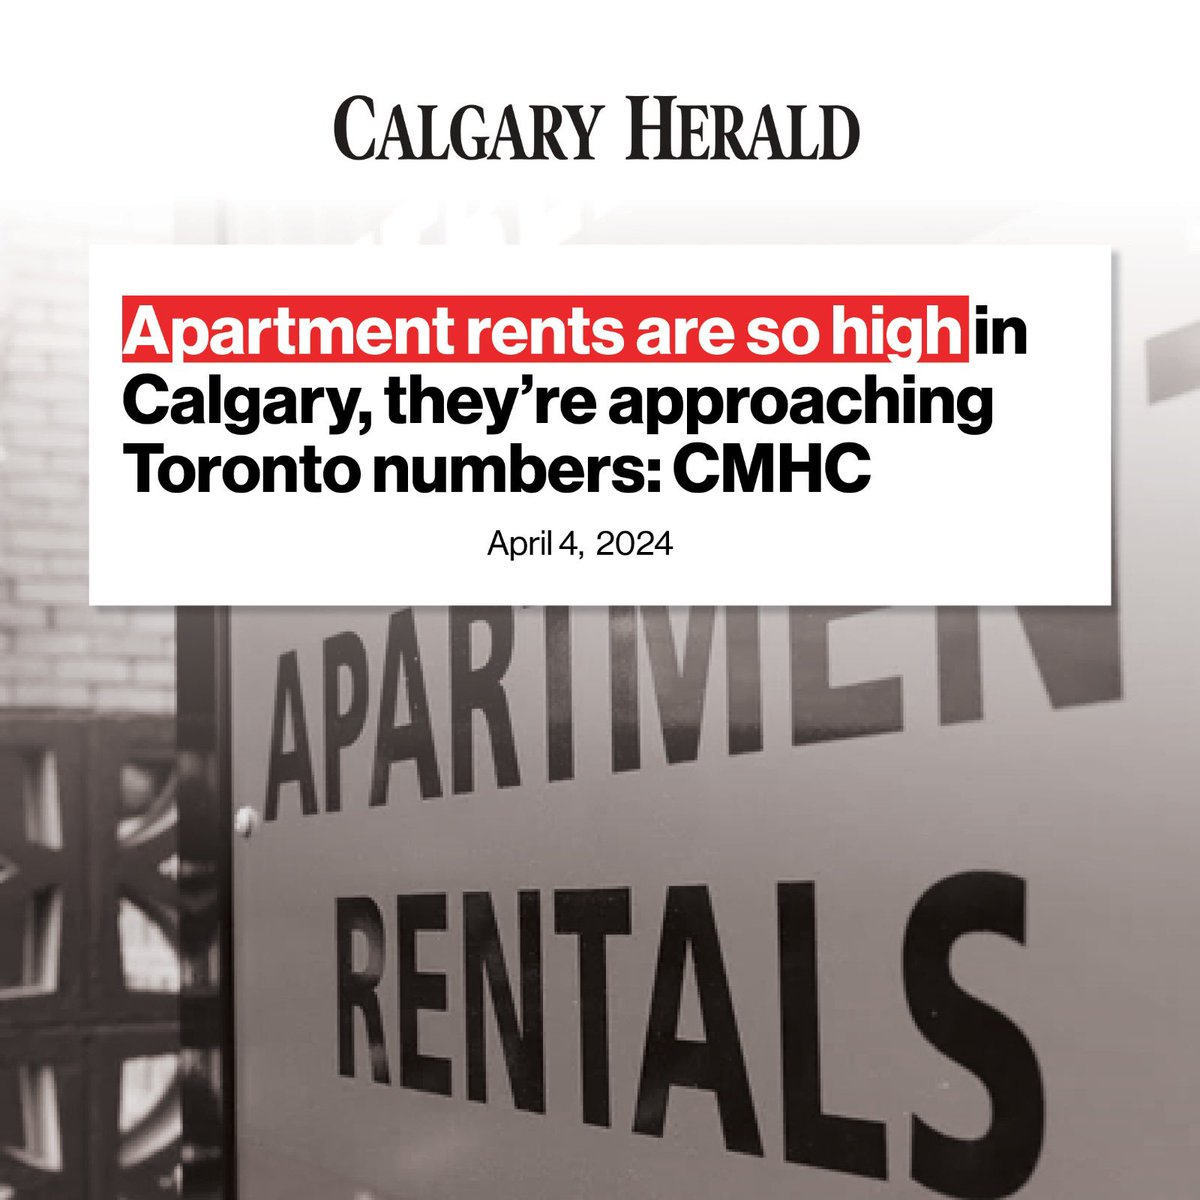 While Danielle Smith boasts about how affordable Alberta is, folks in Calgary are facing 40% rent increases and are having to choose between food and heat. If she doesn’t think that’s a problem, it might explain why she’s done nothing to fix it. calgaryherald.com/business/real-…